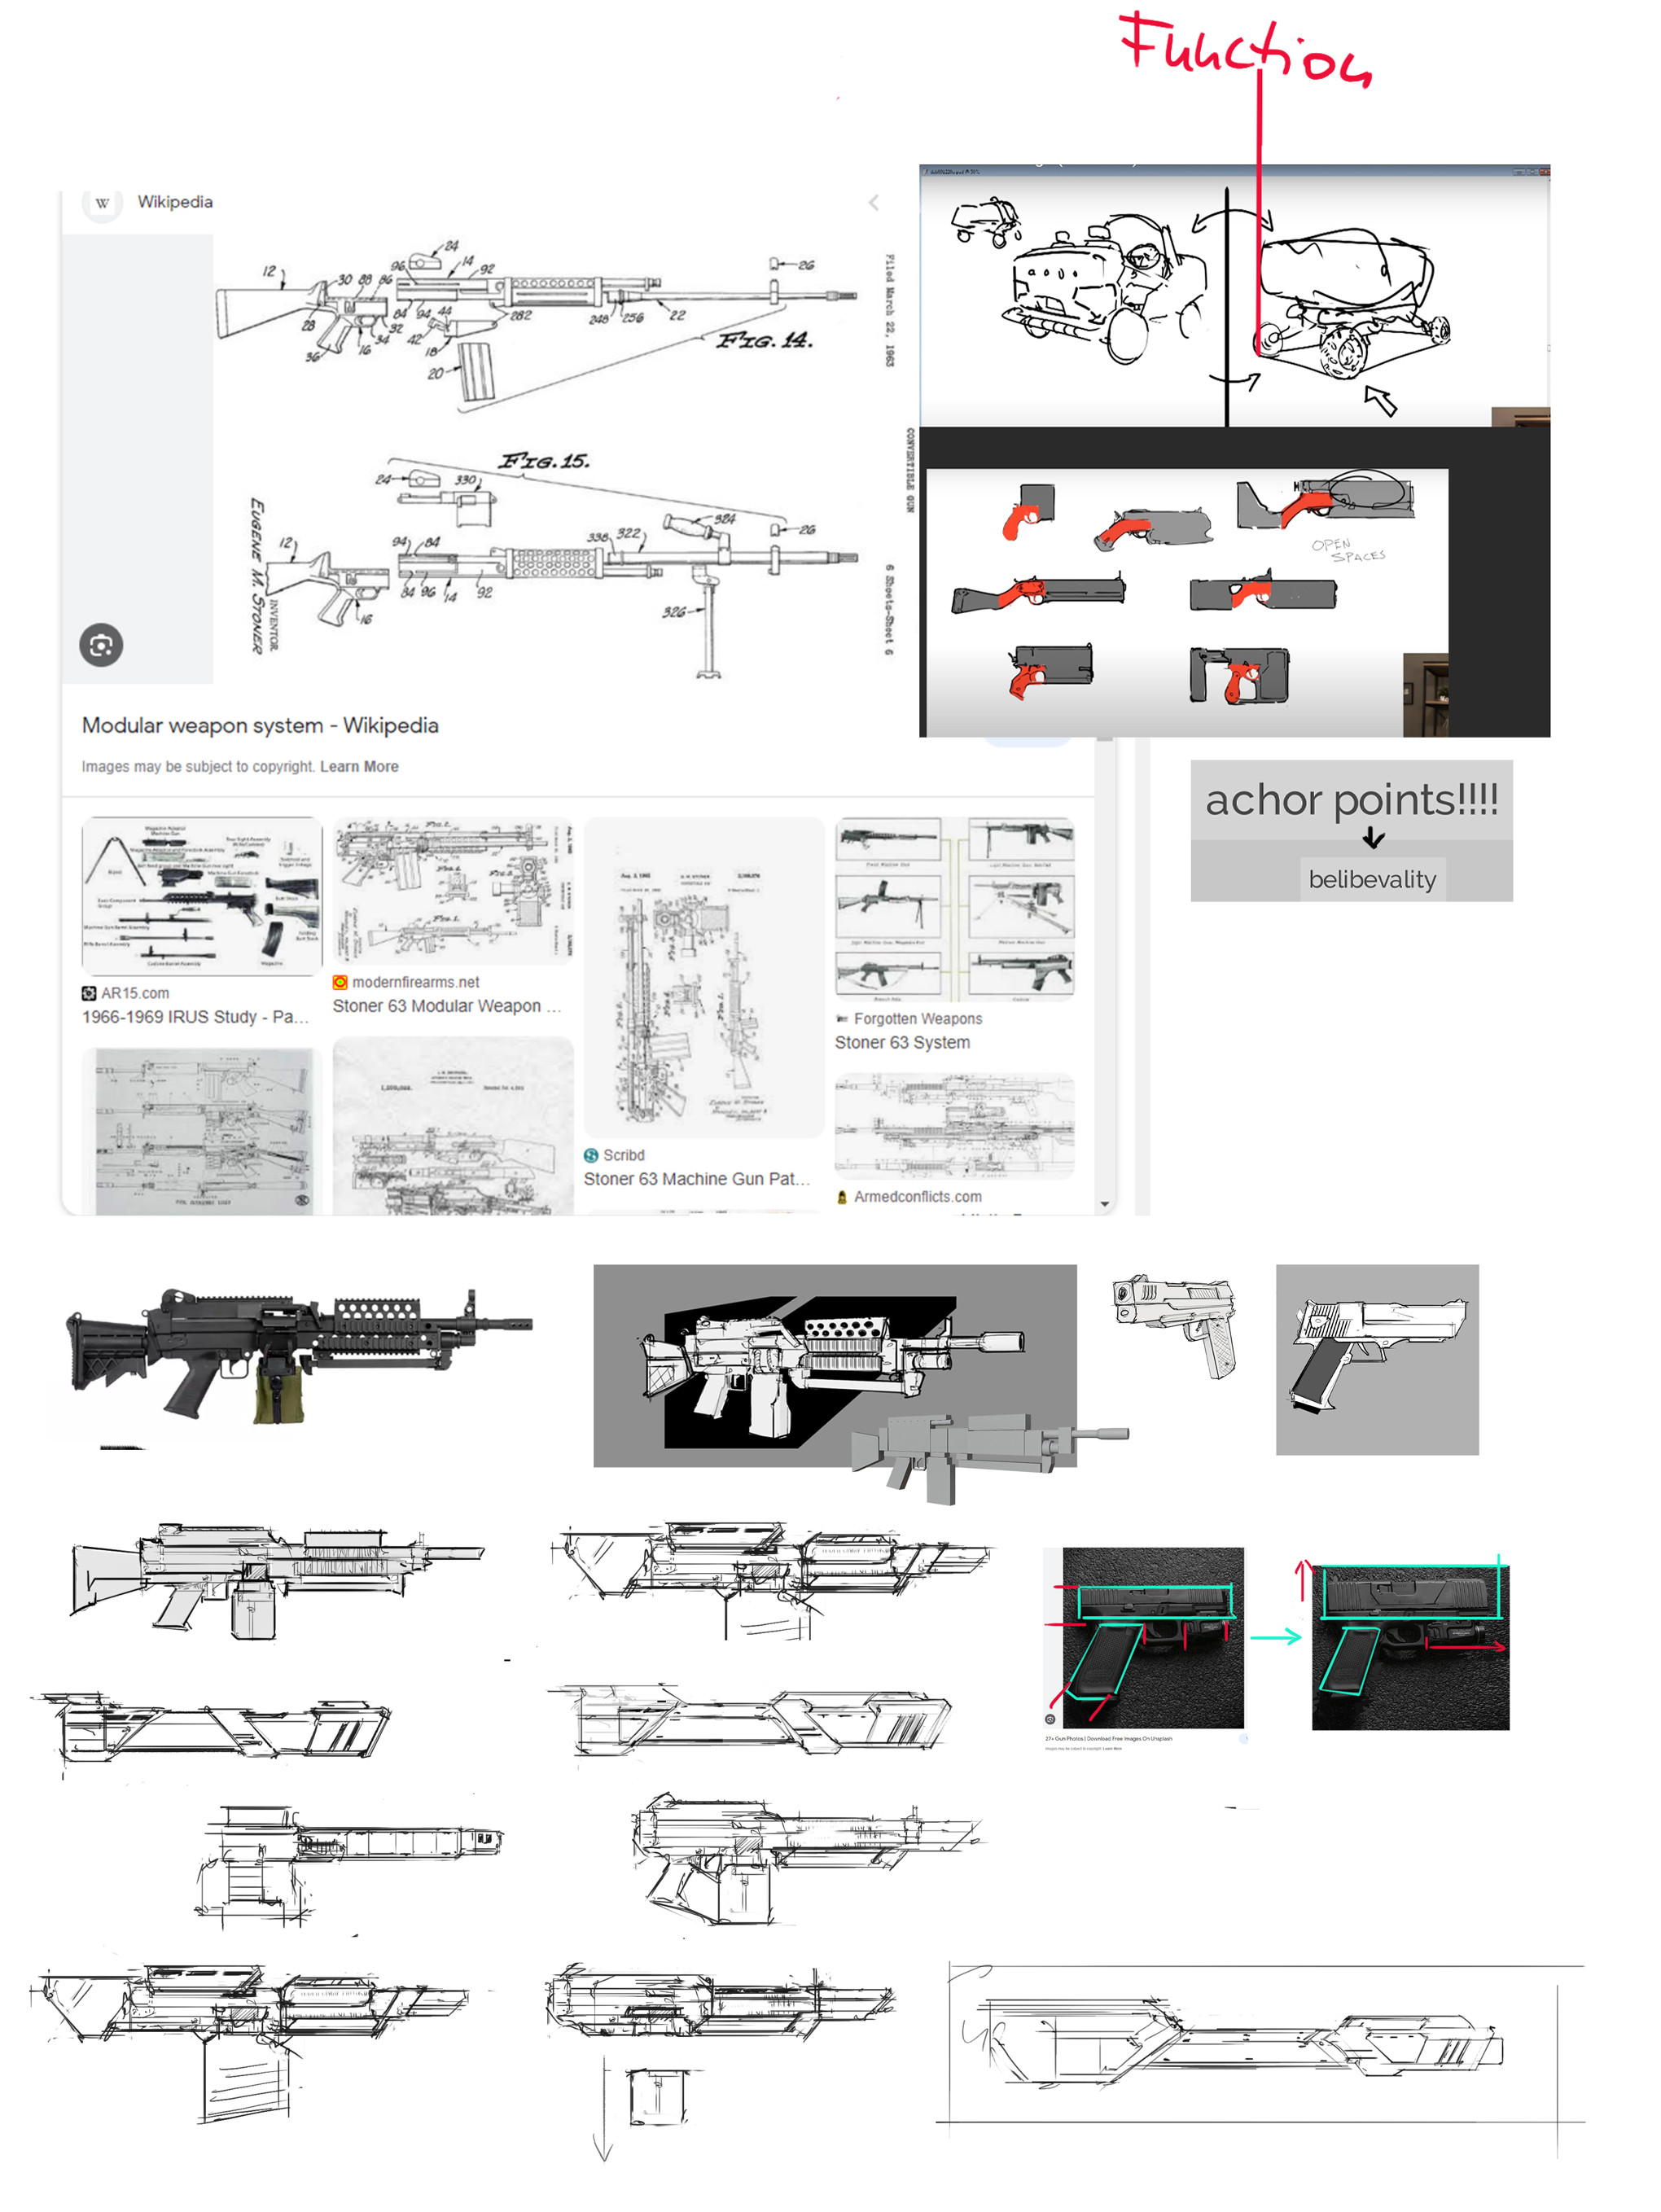 functionality sketches